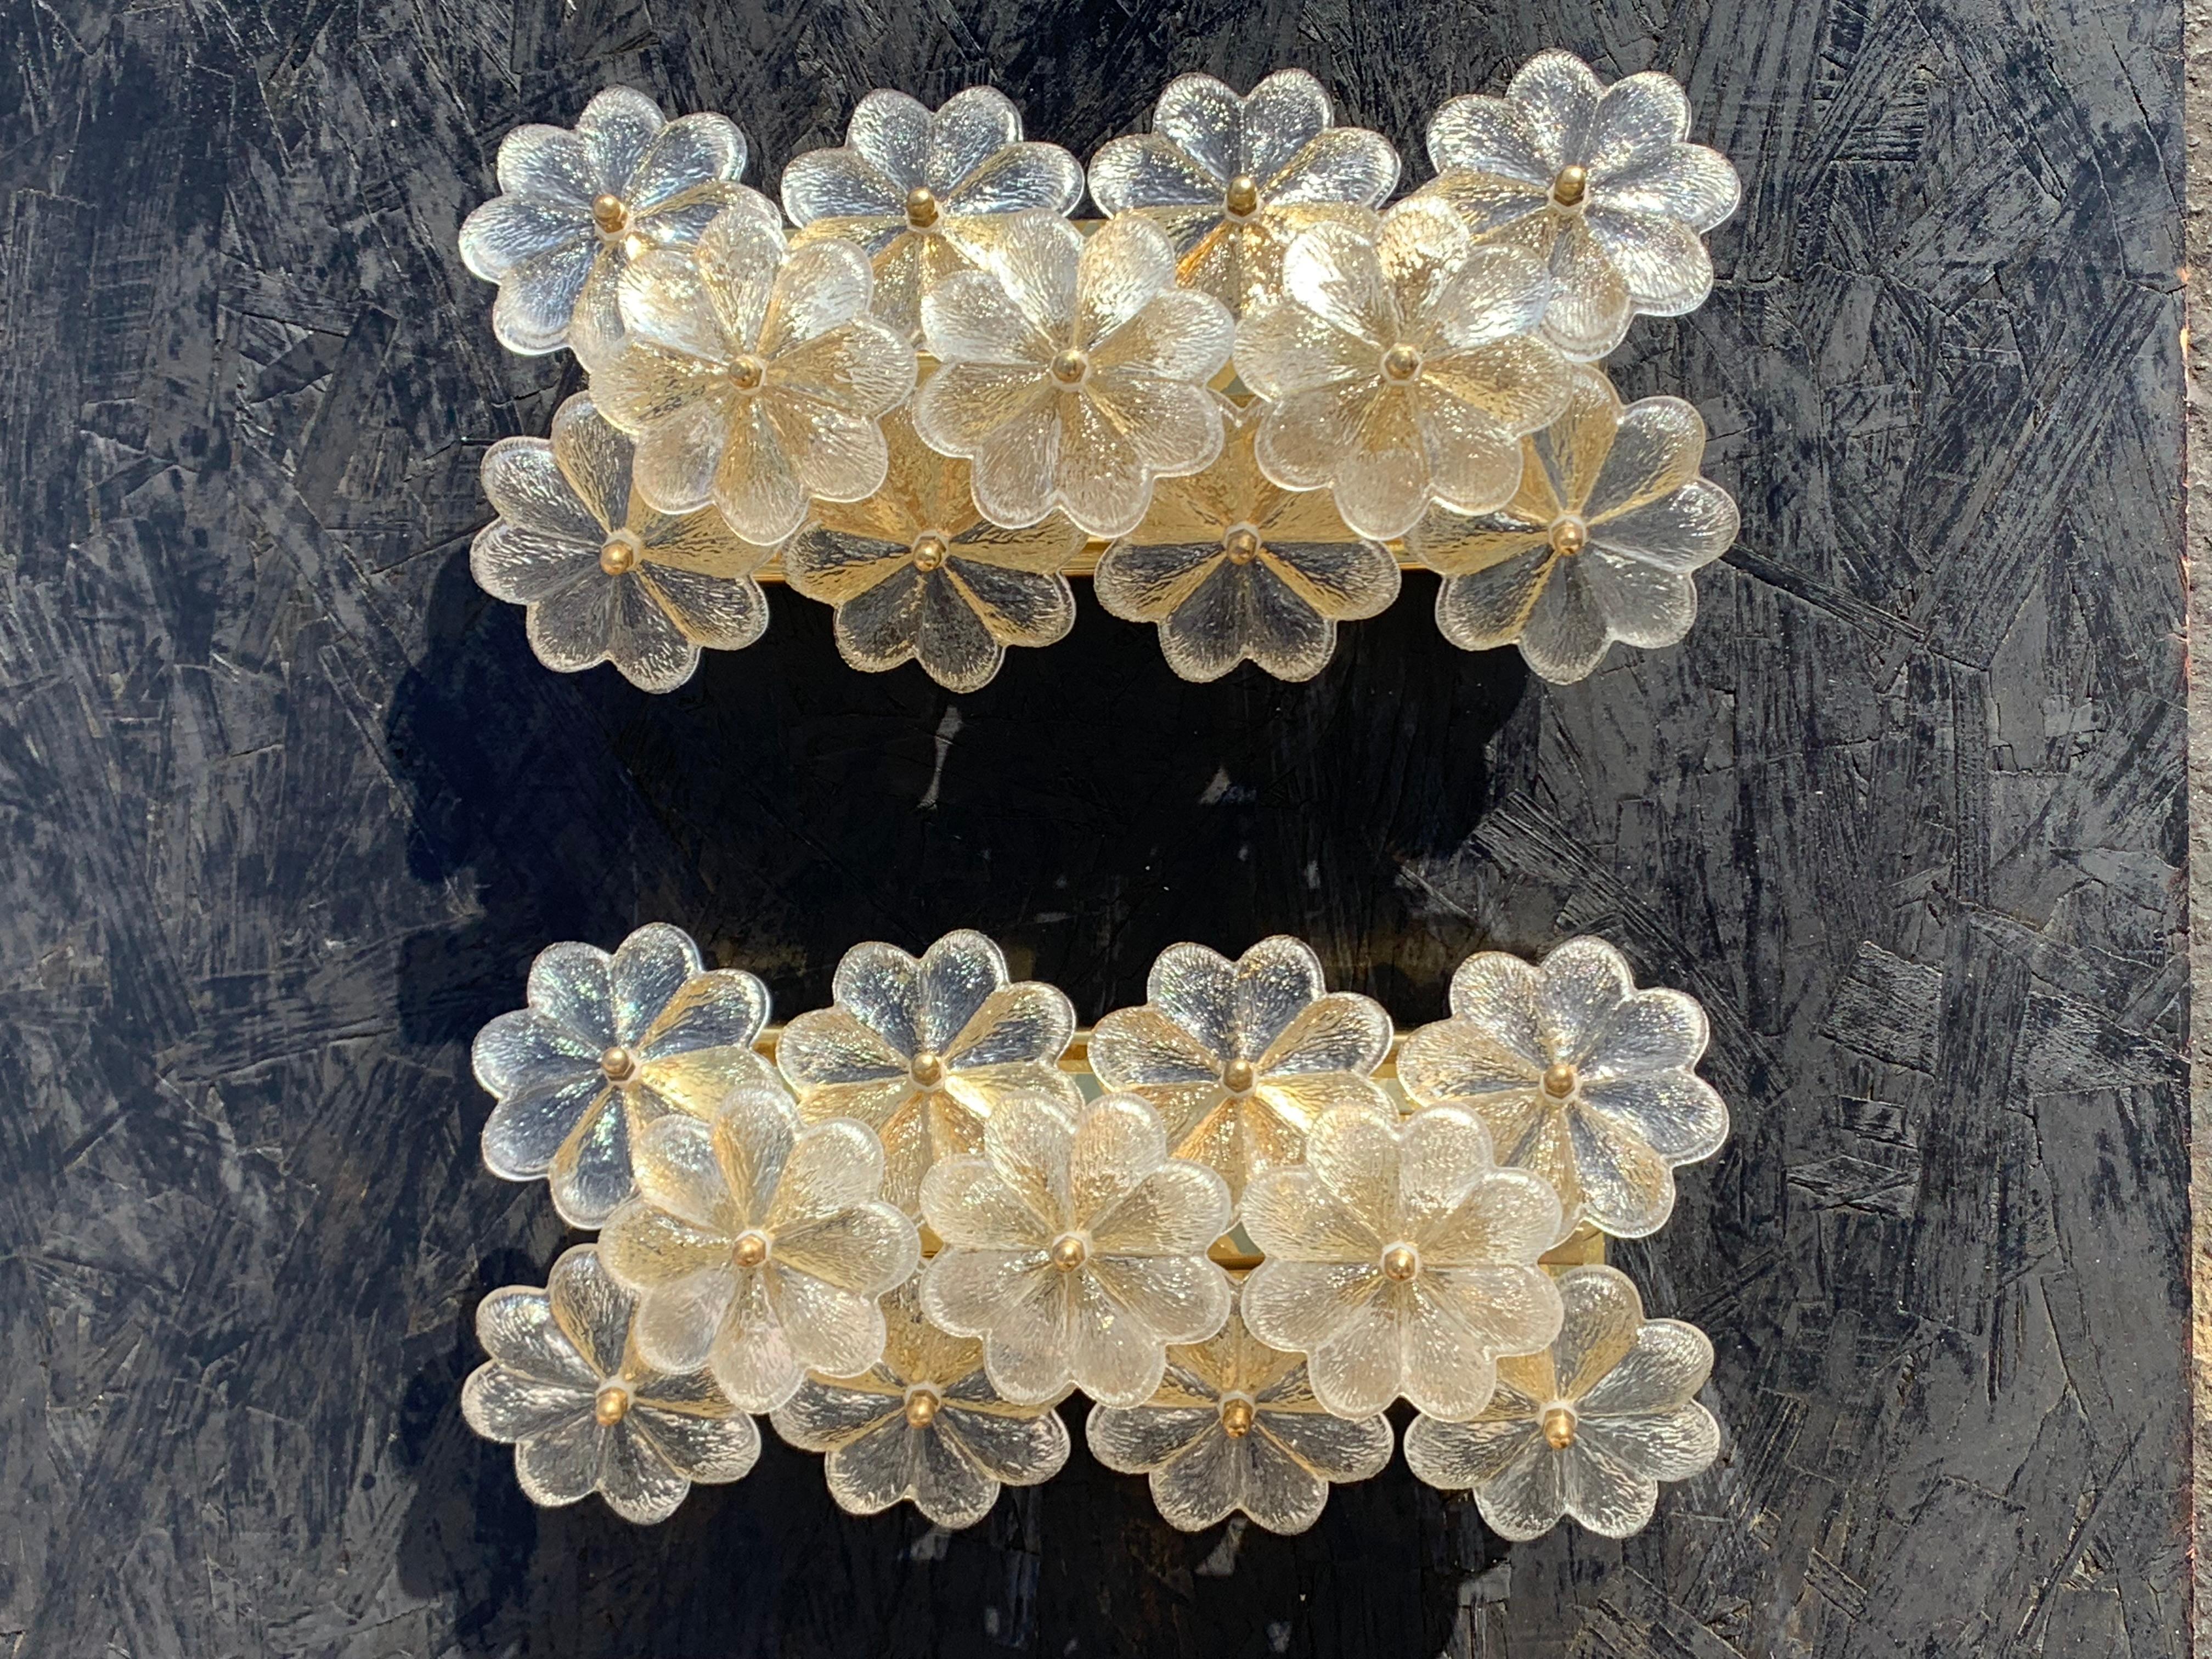 Pair of Ernst Palme floral glass sconces. Can be installed vertical or horizontal. Requires two E14 base up to 40watt bulbs. Rewired for USA.